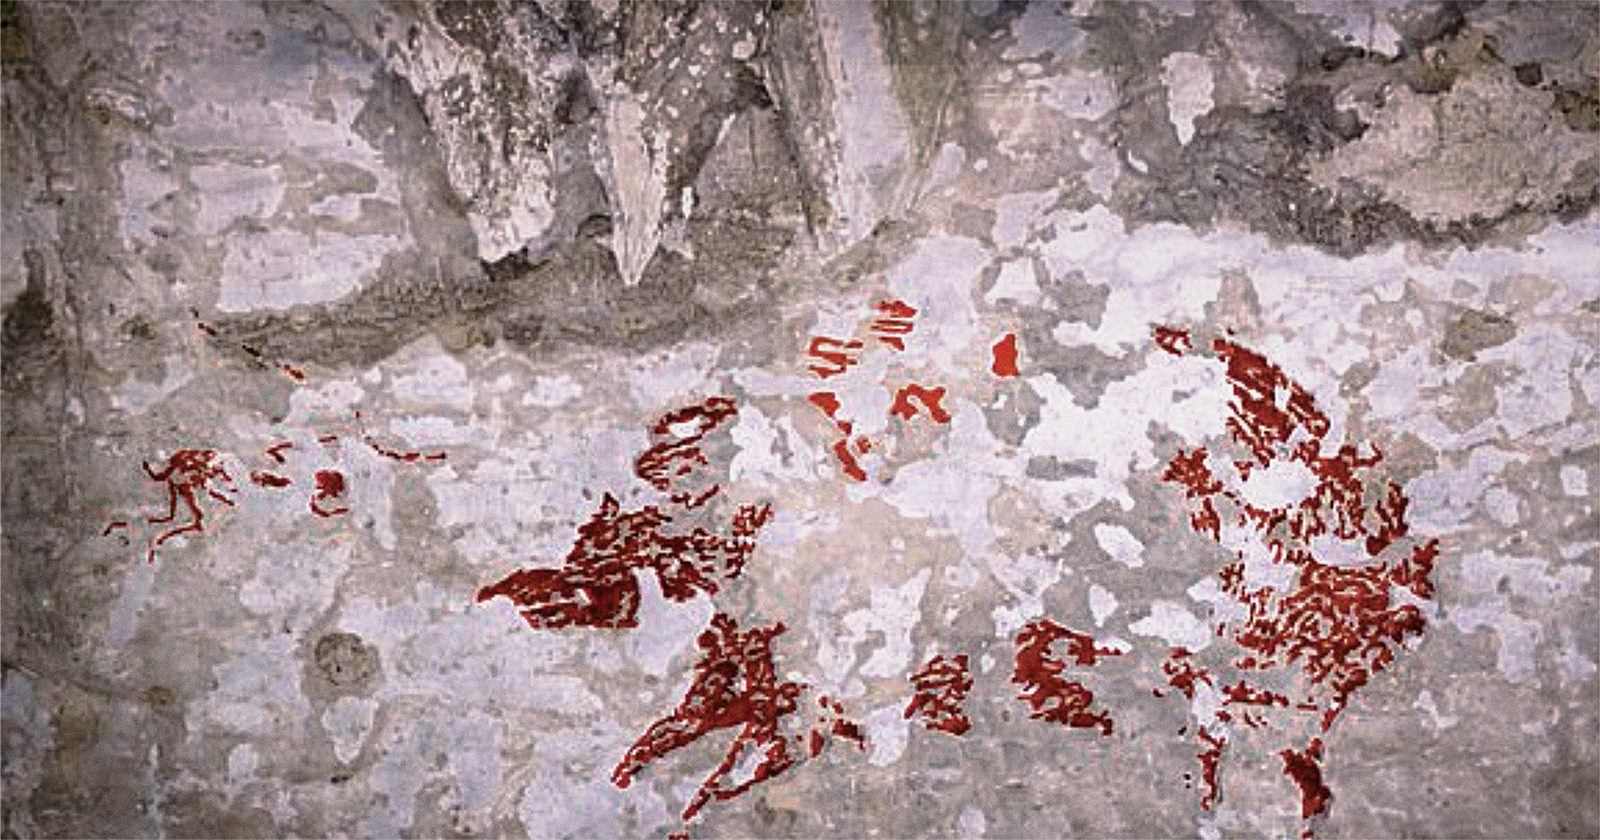 Indonesia sulawesi rock art human-like hunters fleeing mammals dated 44,000 years old cave art species